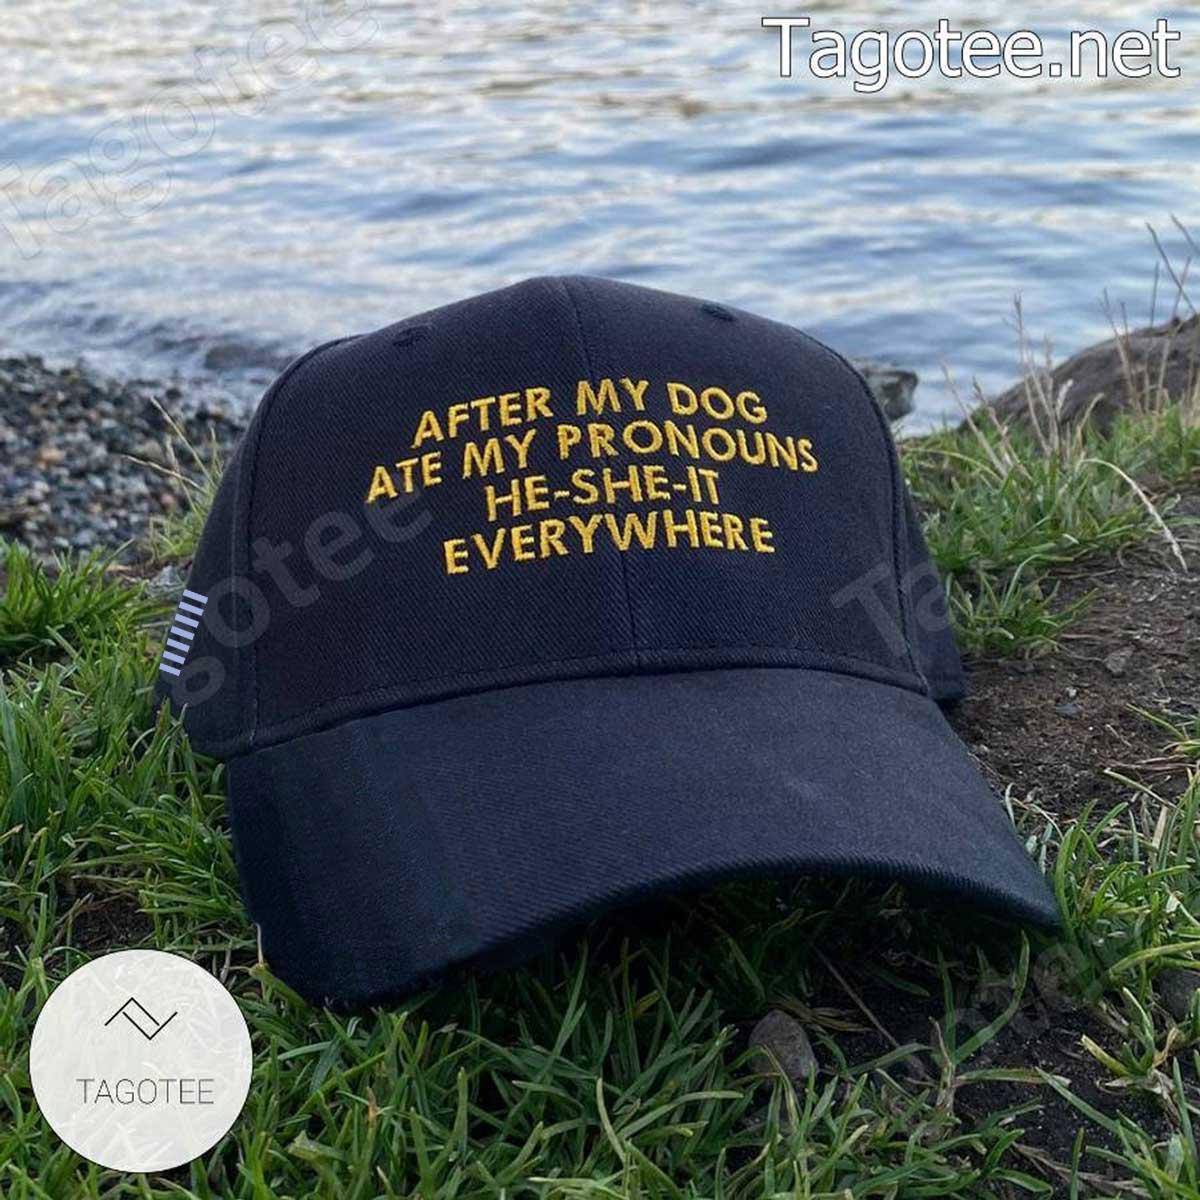 After My Dog Ate My Pronouns He She It Everywhere American Flag Cap